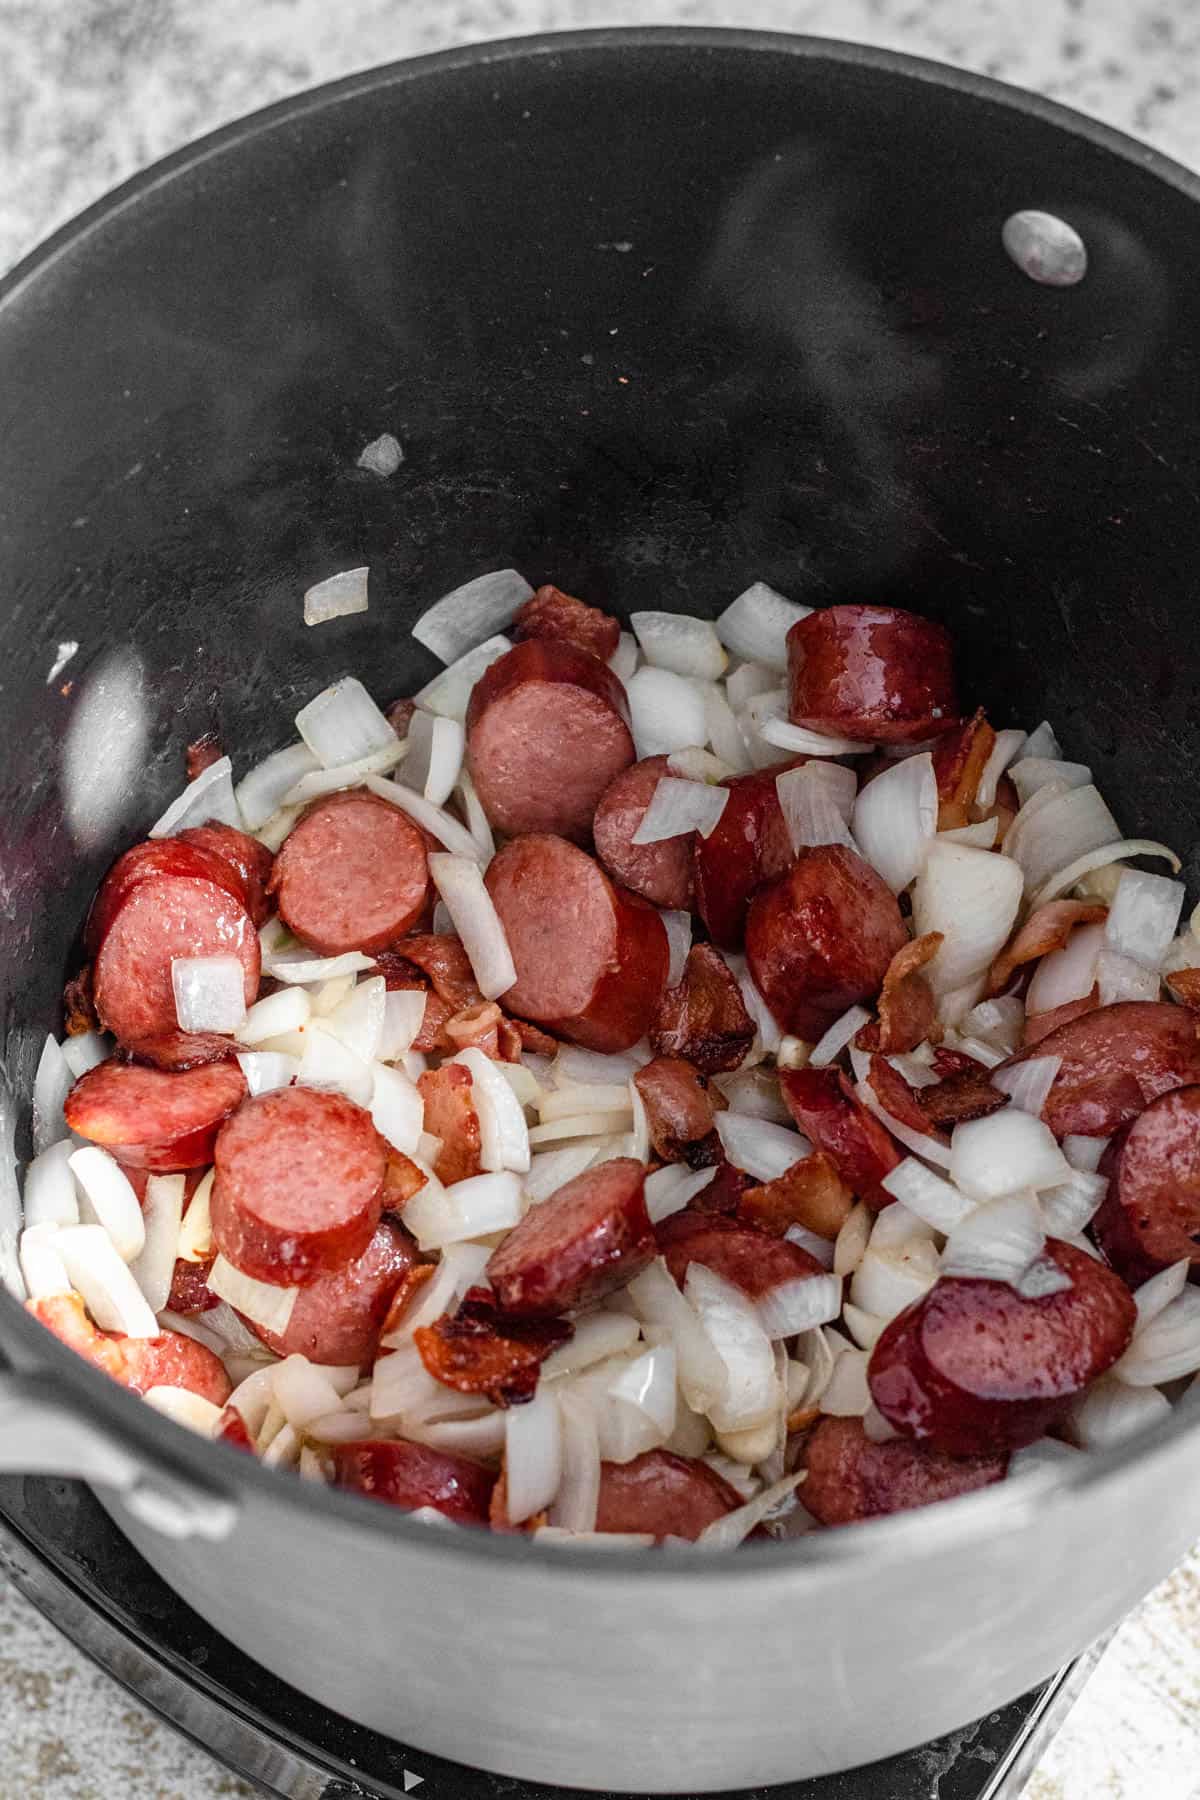 Onions and garlic added to the sausage. 